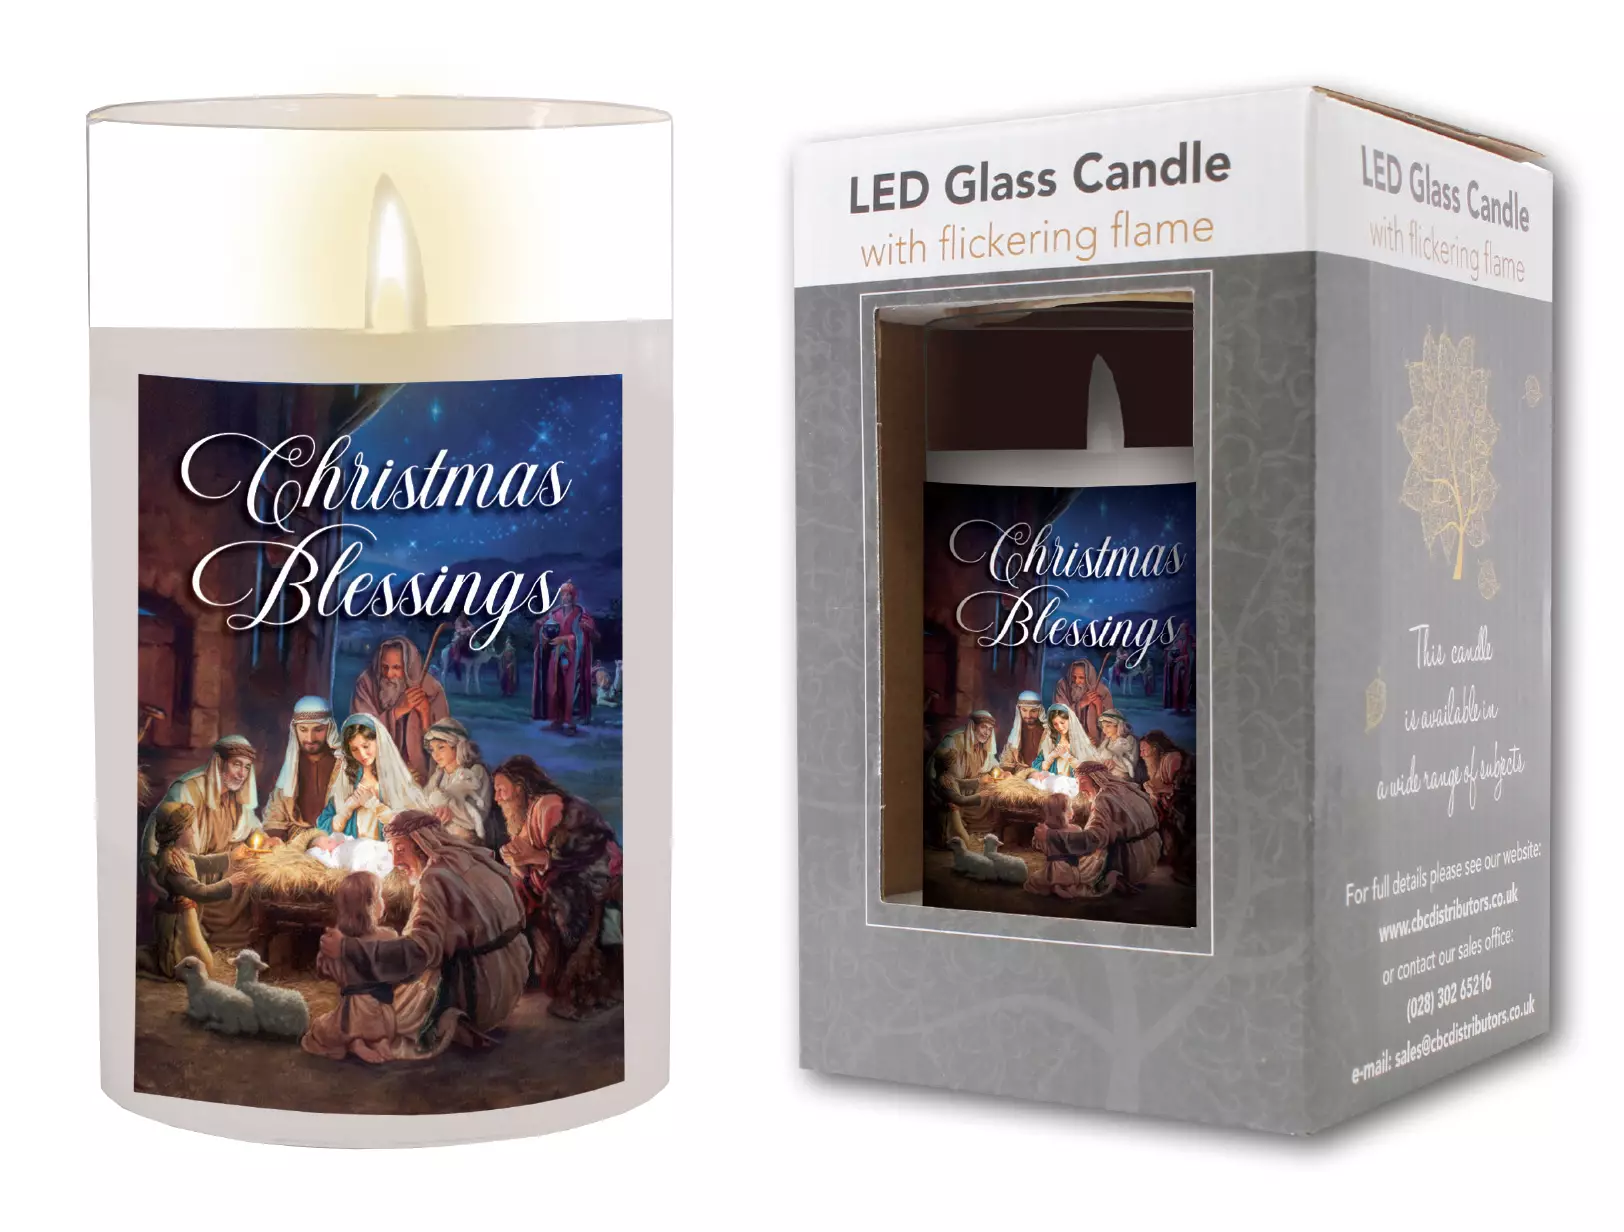 Christmas Blessings LED Candle